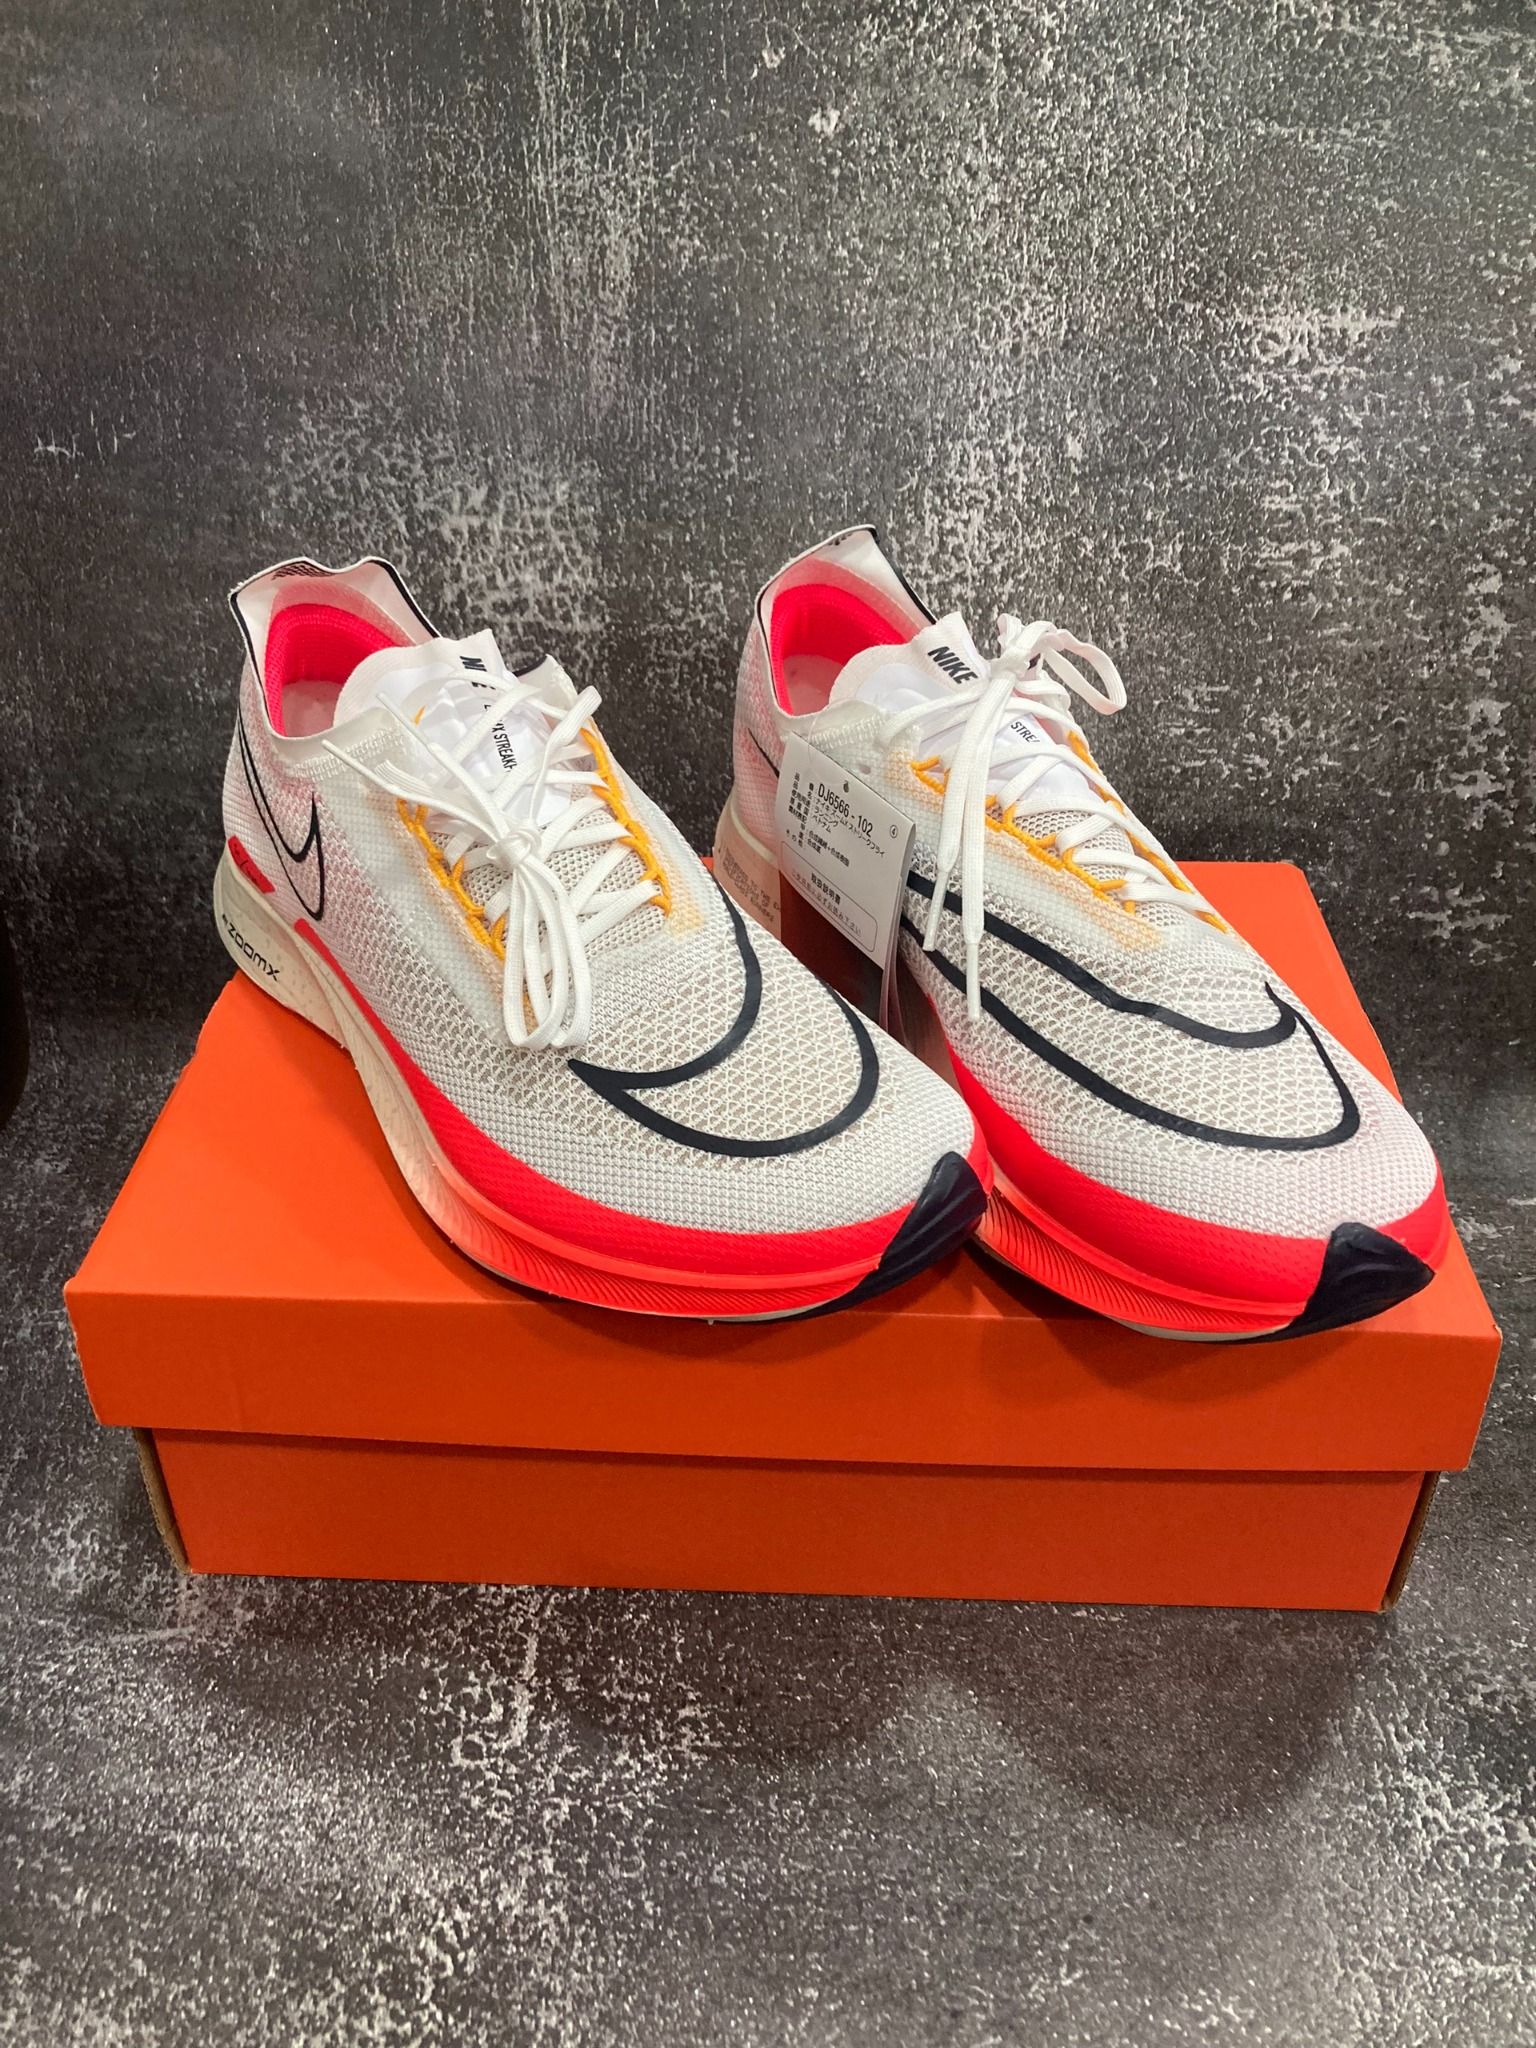 Giày chạy bộ Nike zoomx Steakfly